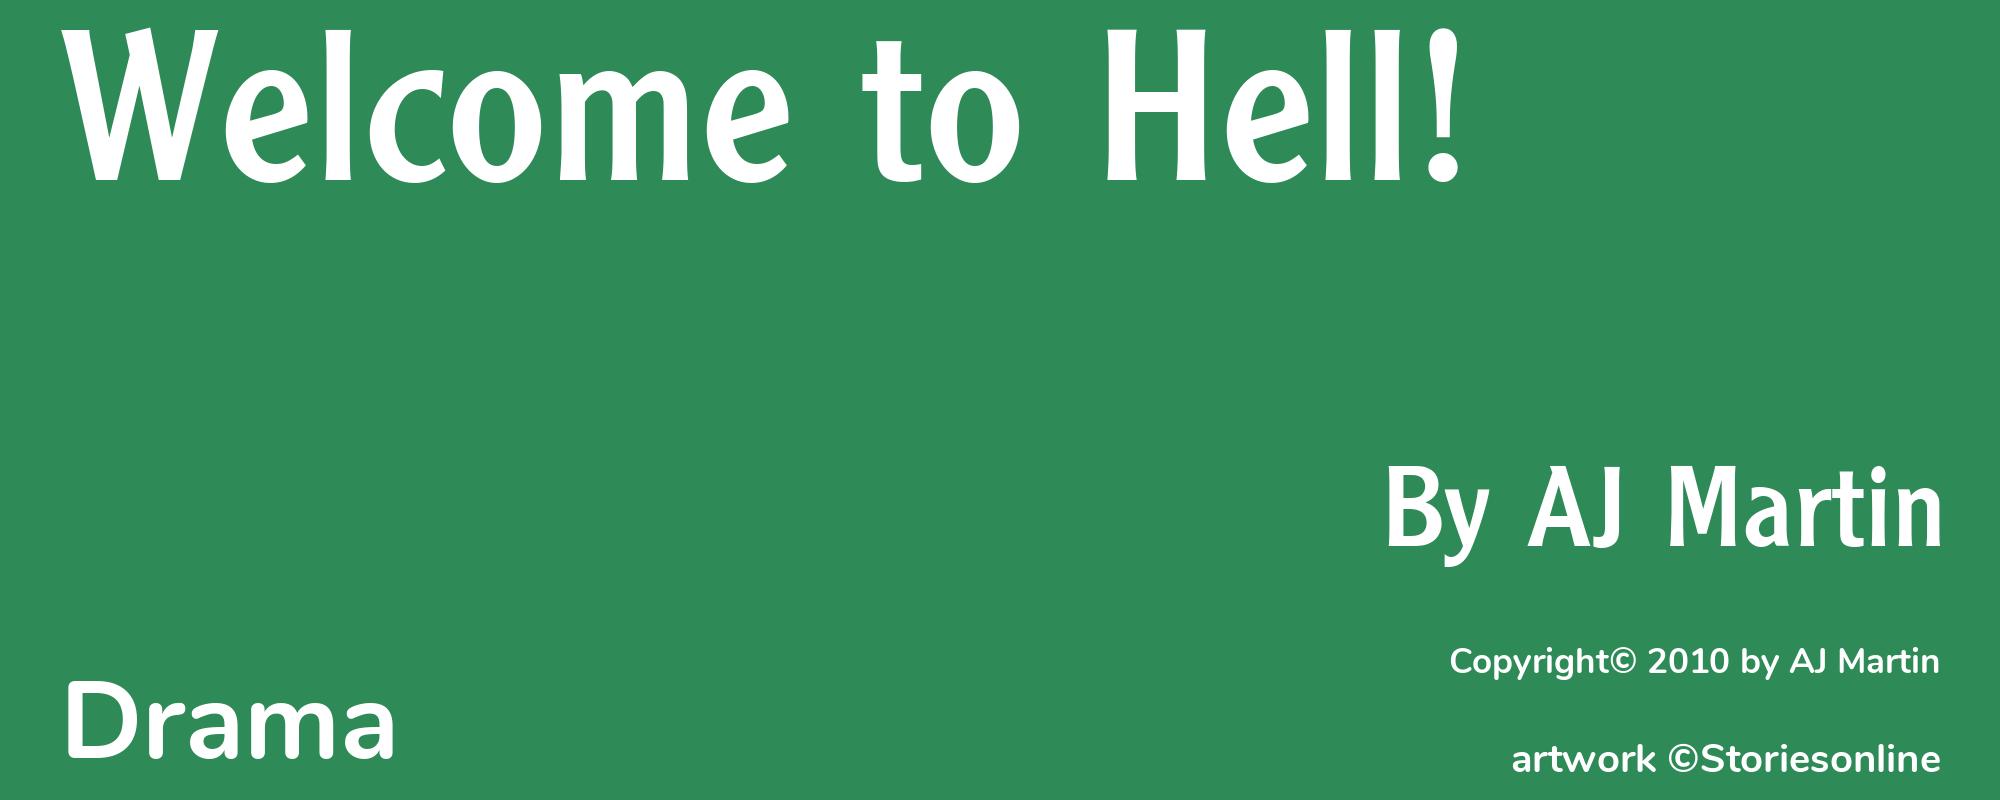 Welcome to Hell! - Cover